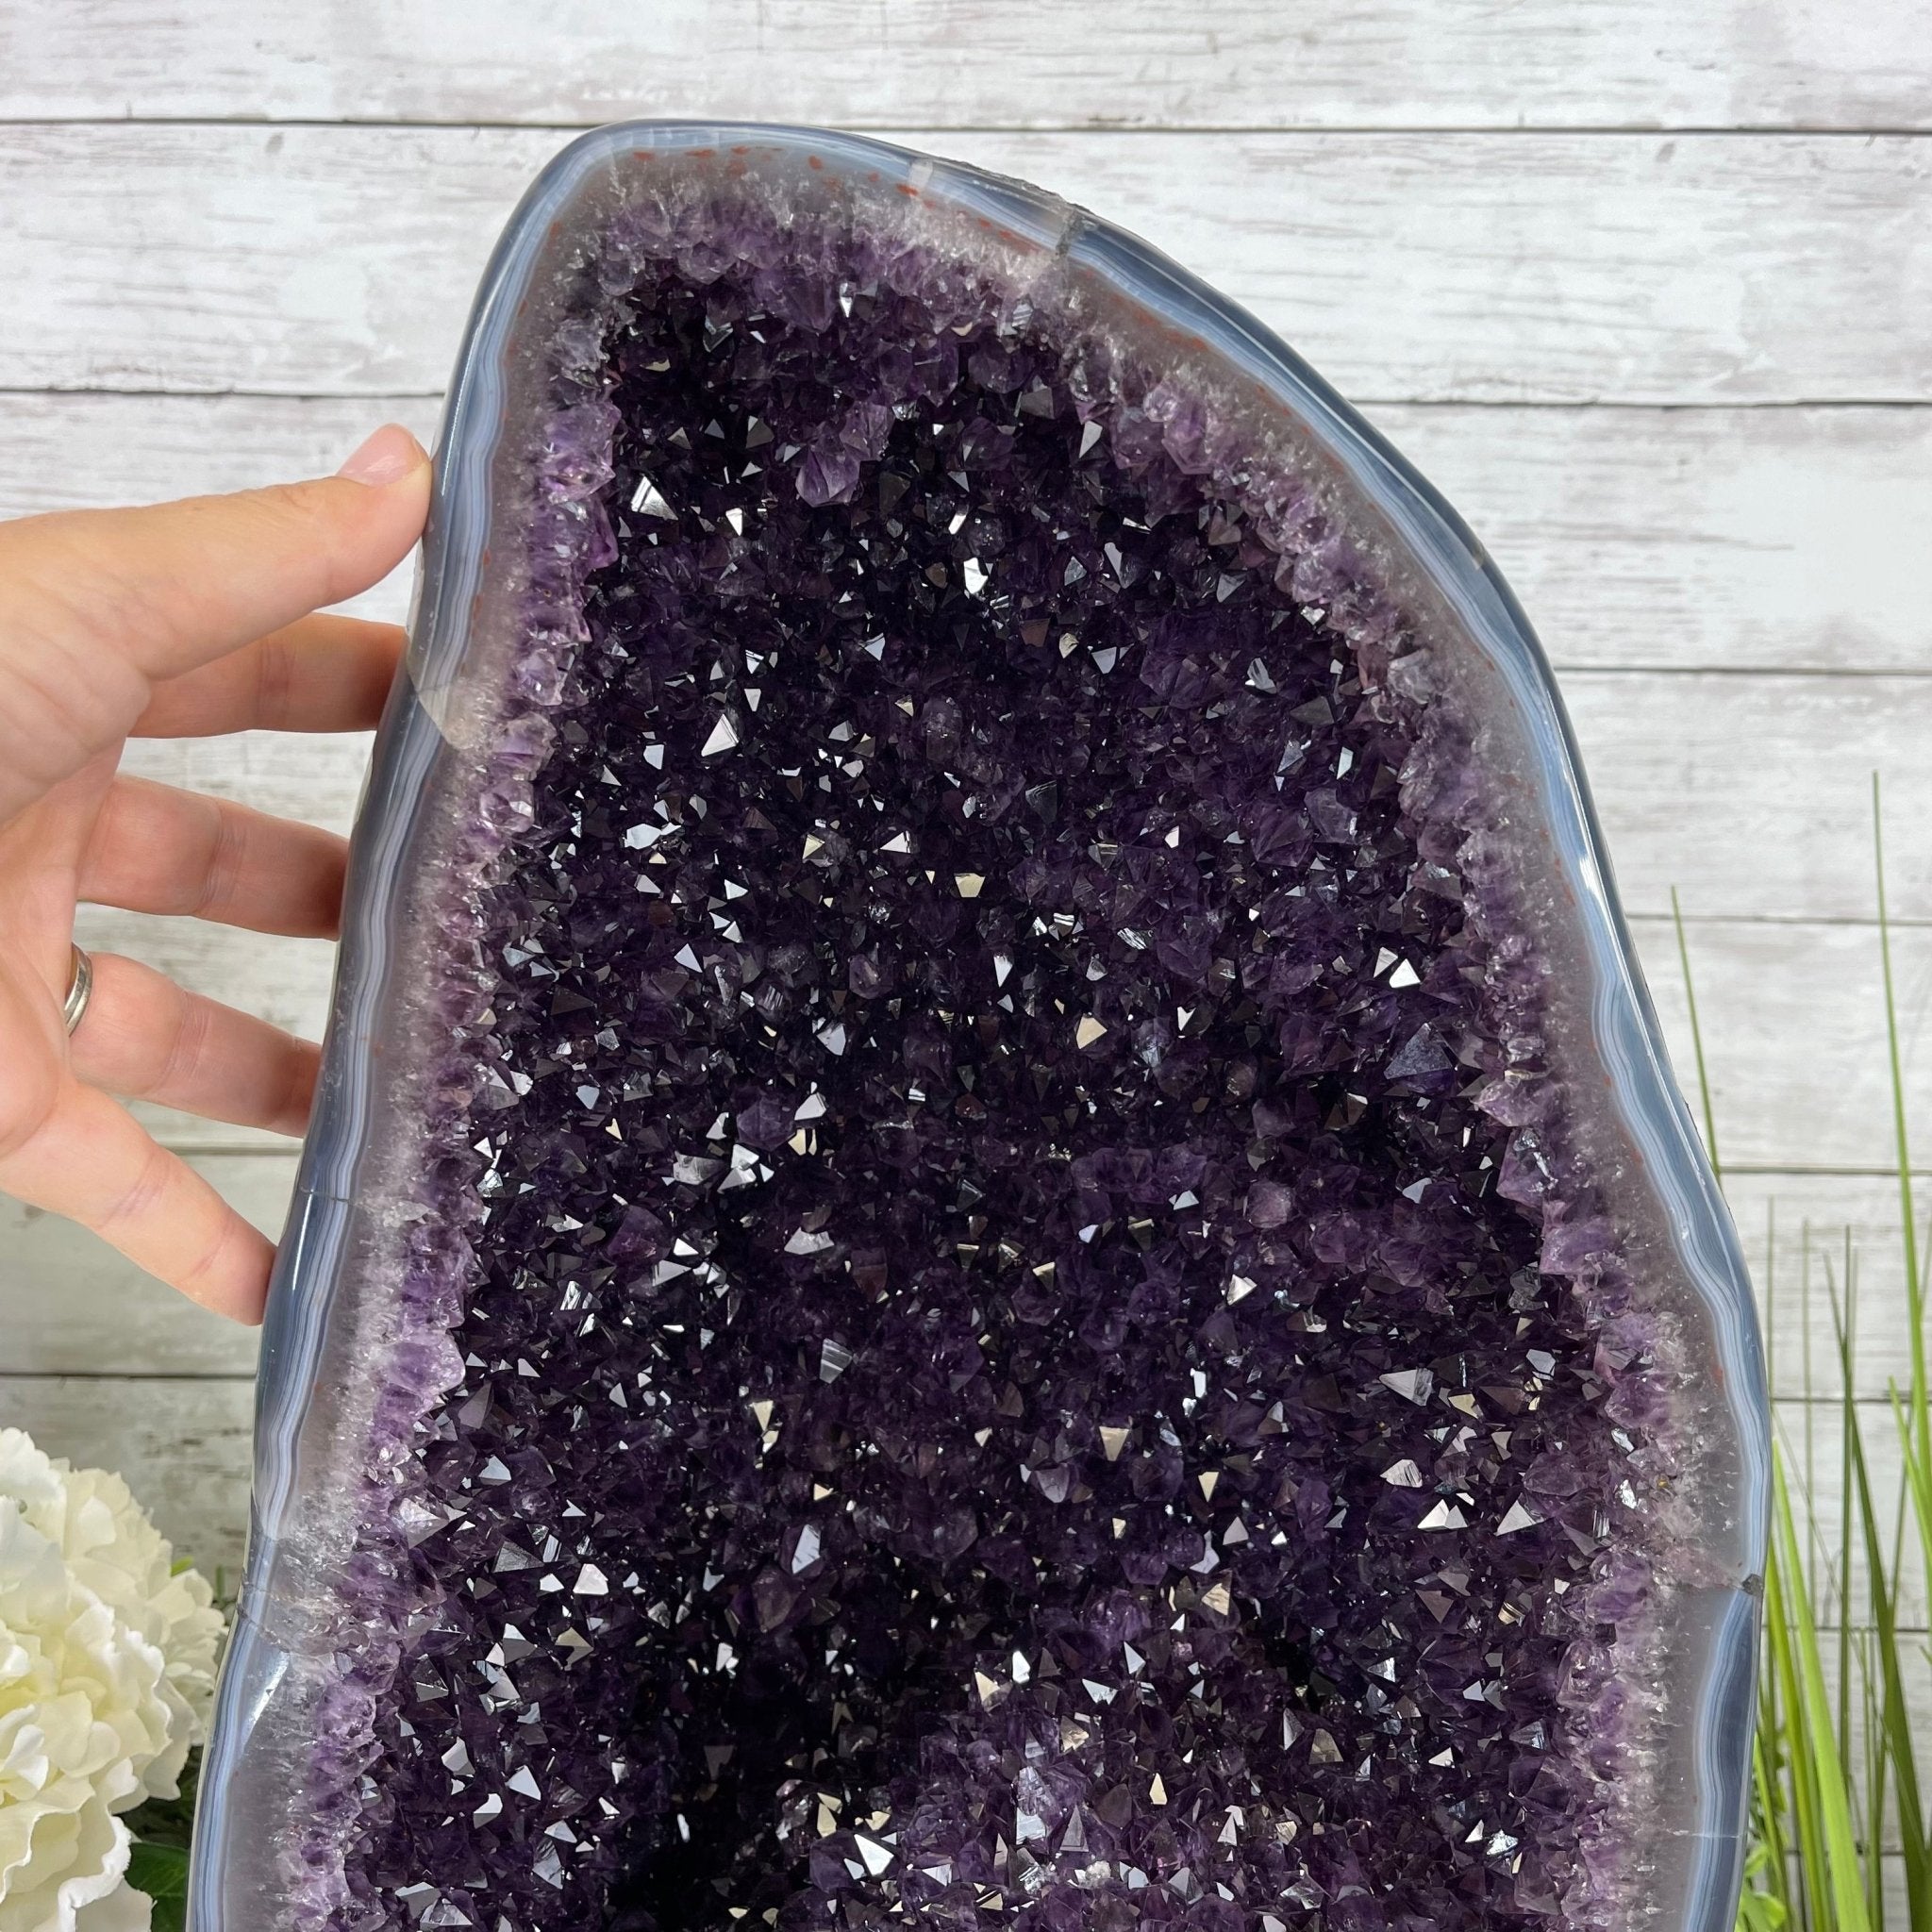 Super Quality Brazilian Amethyst Cathedral, 17” tall & 48.2 lbs #5601-1129 by Brazil Gems - Brazil GemsBrazil GemsSuper Quality Brazilian Amethyst Cathedral, 17” tall & 48.2 lbs #5601-1129 by Brazil GemsCathedrals5601-1129